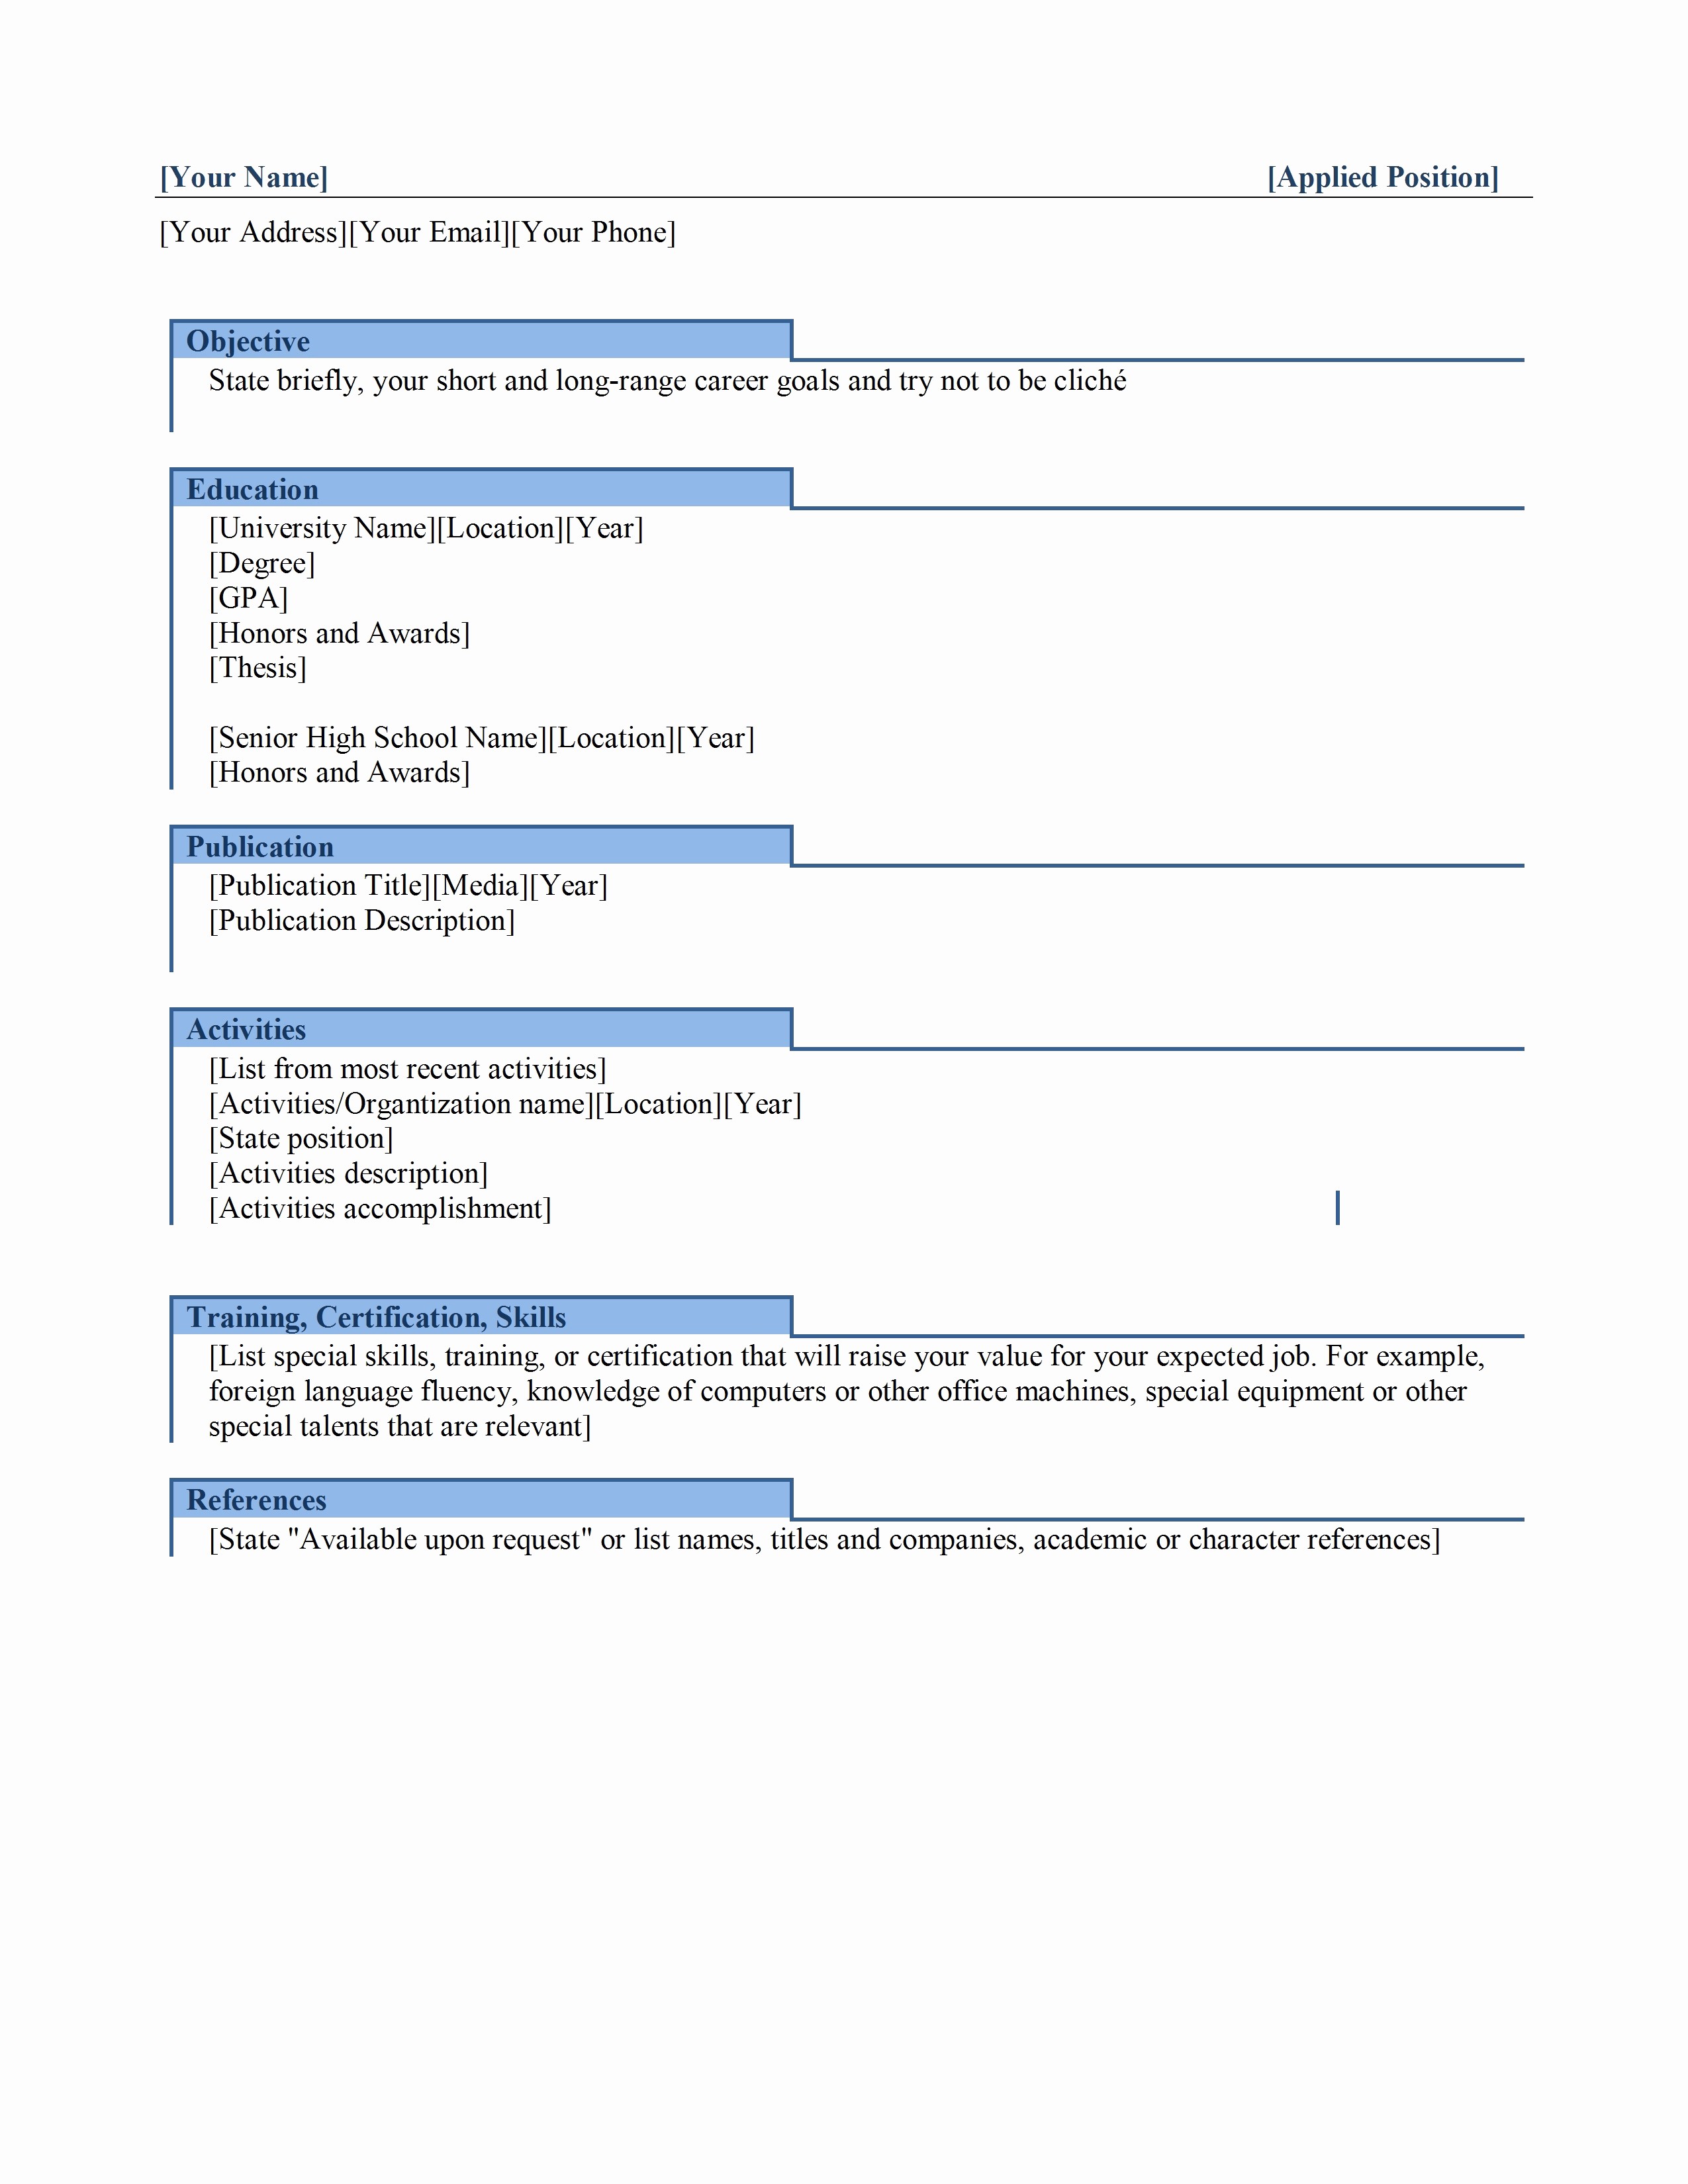 Microsoft Word 2010 Resume Templates Fresh Resume format Free Download In Ms Word 2010 Resume Ideas